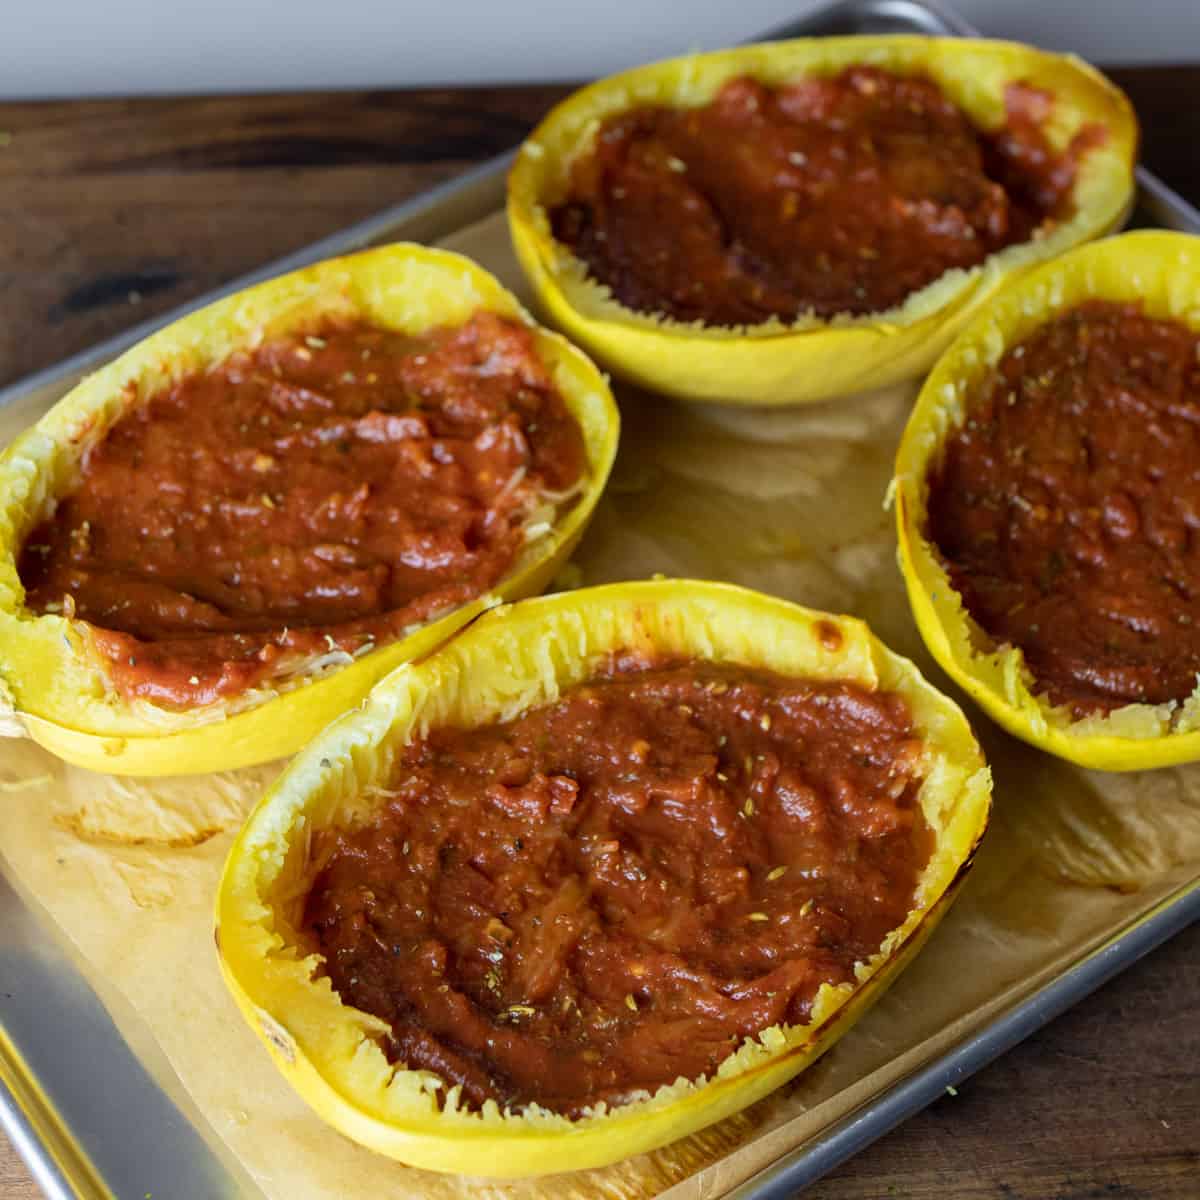 Baked squash halves with pizza sauce spread in the hollowed out area.